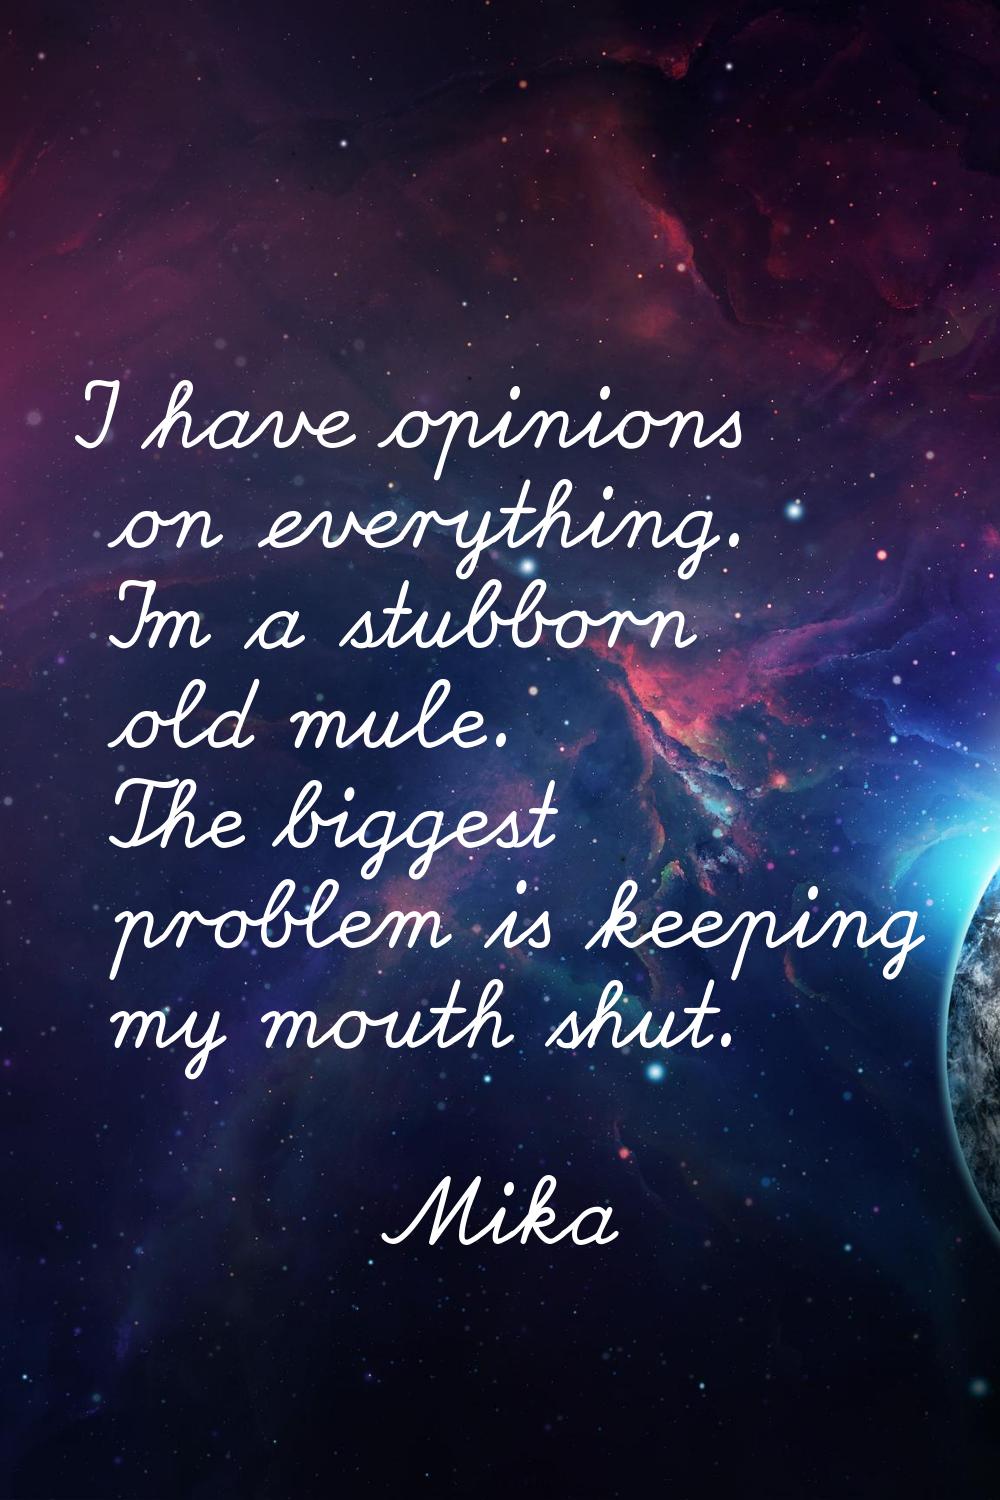 I have opinions on everything. I'm a stubborn old mule. The biggest problem is keeping my mouth shu